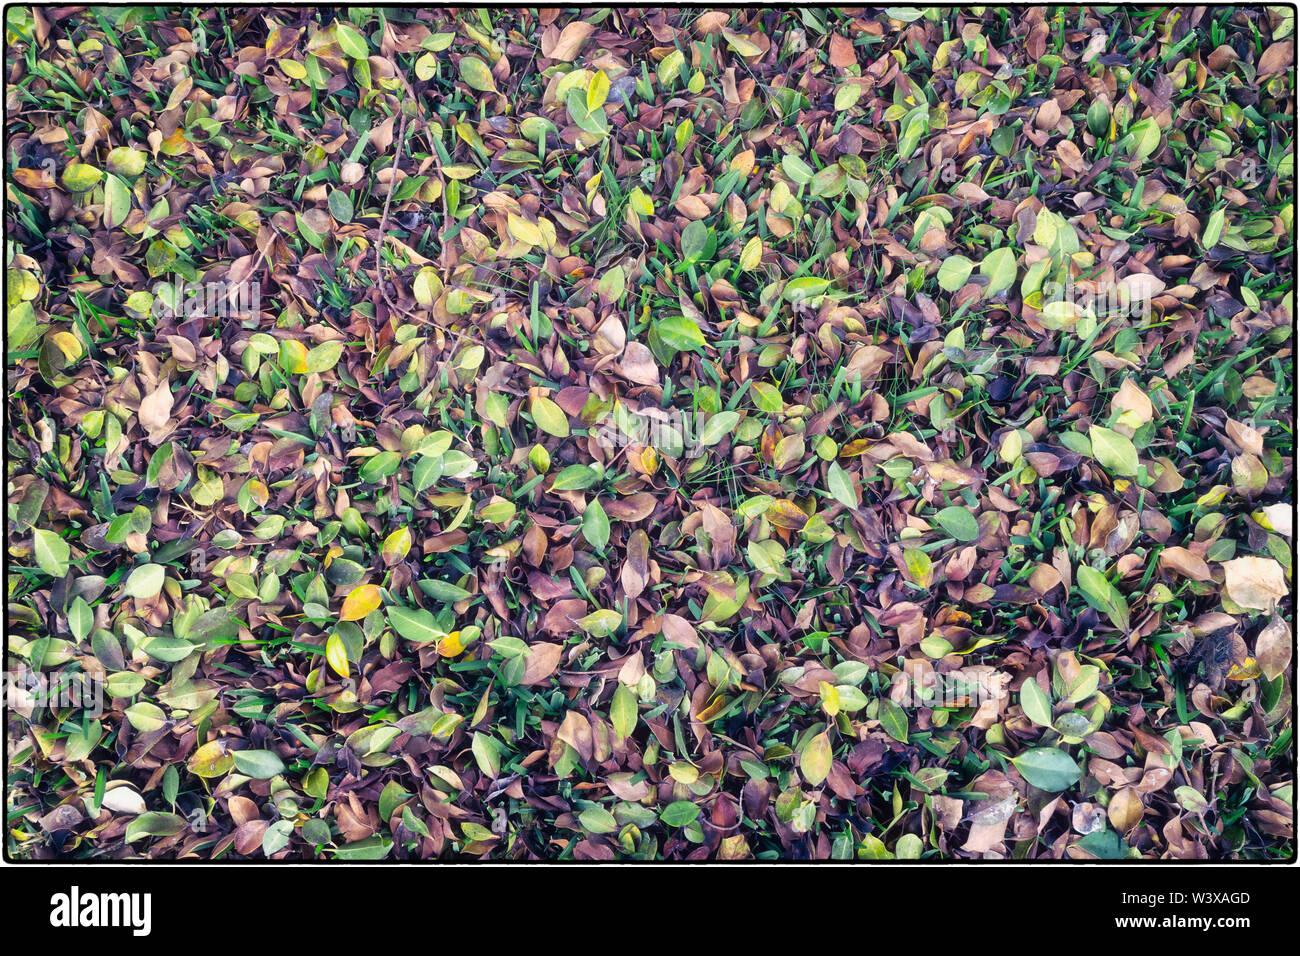 Carpet of leaves on ground. Stock Photo